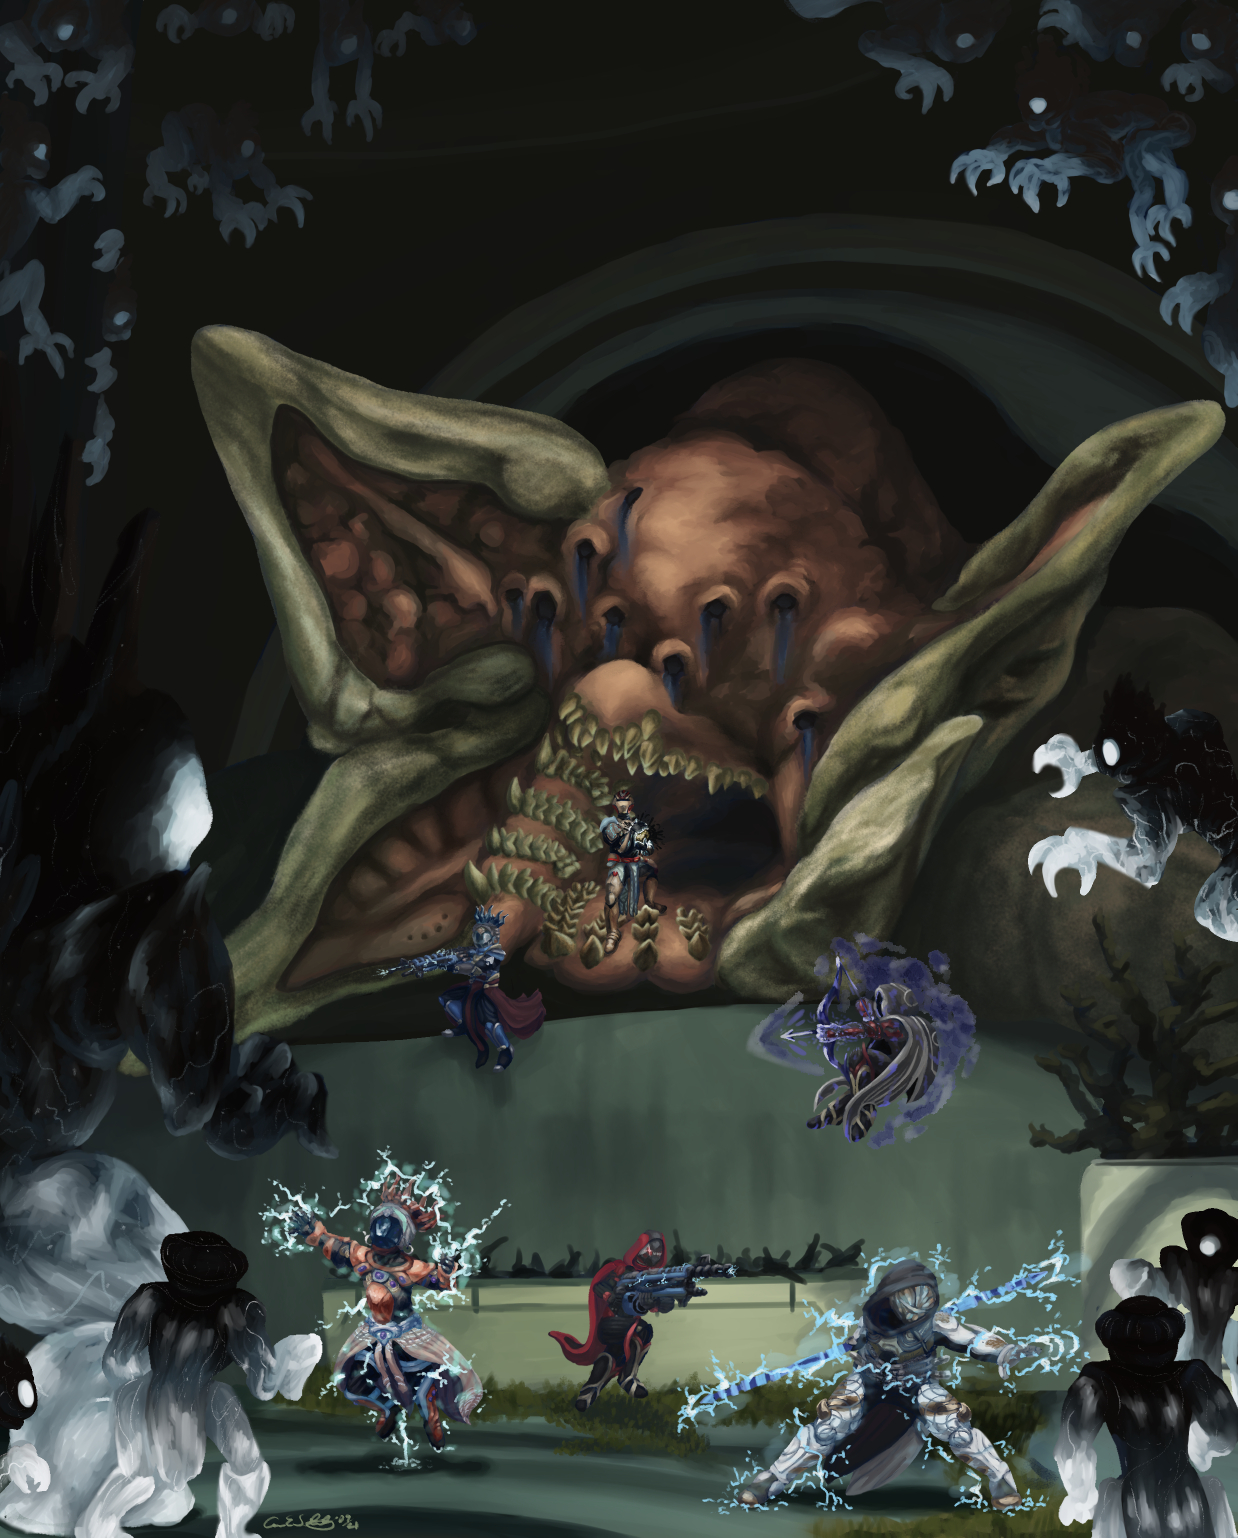 A digital painting of the final encounter in the raid Last Wish from the video game Destiny 2. The background has the defeated body of Riven being swarmed with Taken enemies. The enemies are trying to stop the six Guardians running towards the foreground using different weapons and powers. The sixth guardian is standing in Riven's open mouth holding her corrupted heart.